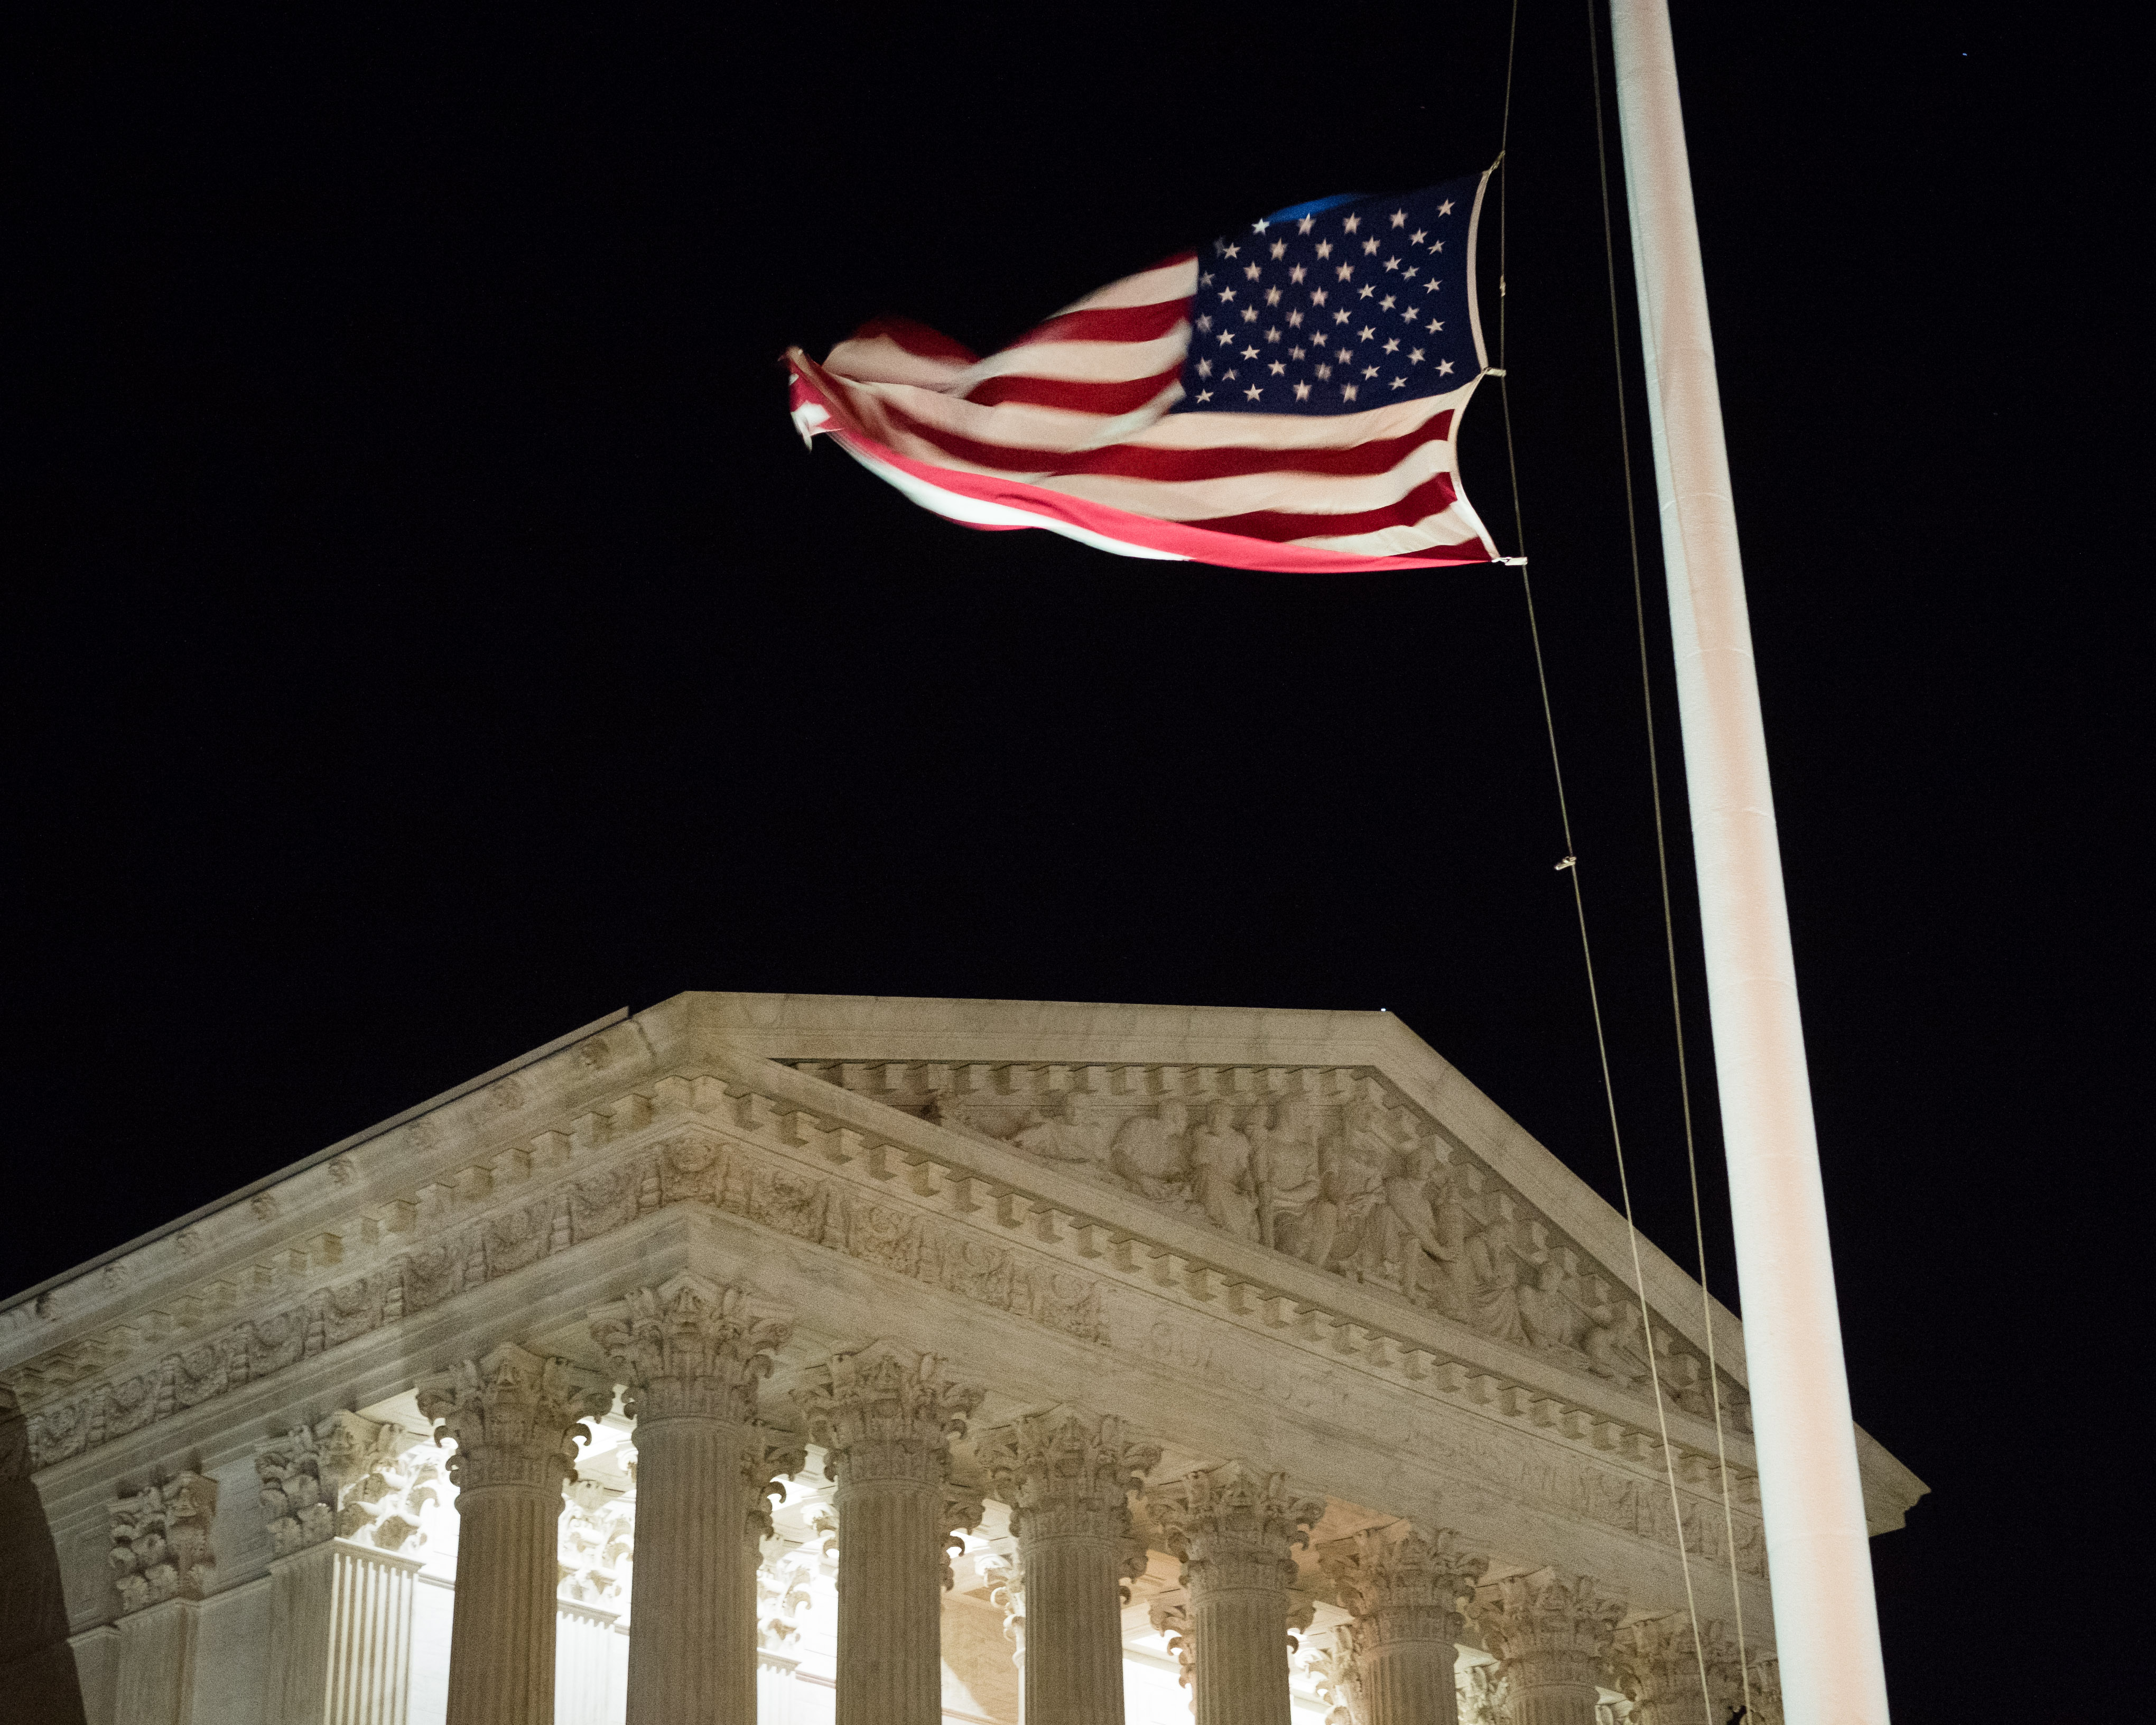 A U.S. flag flies at half-staff in front of the U.S. Supreme Court in Washington Saturday, Feb. 13, 2016, after is was announced that Supreme Court Justice Antonin Scalia, 79, had died. (AP Photo/J. David Ake)